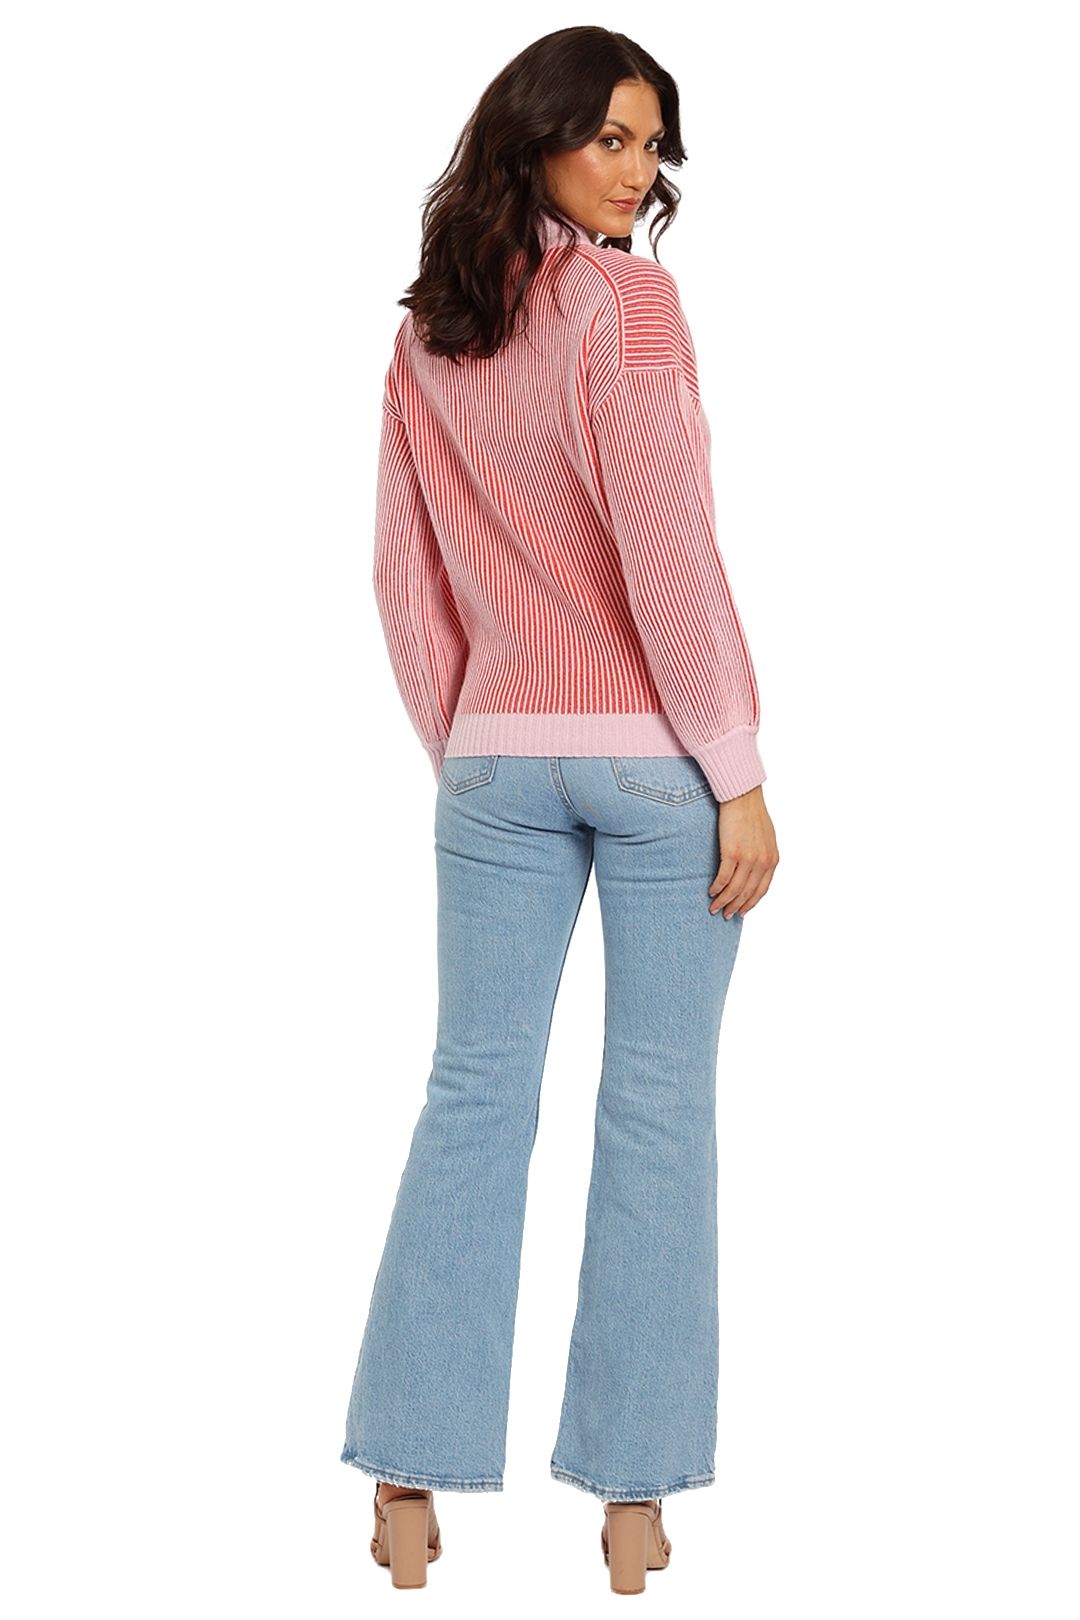 Bande Studio Isabelle Slouch Knit Pink Crew